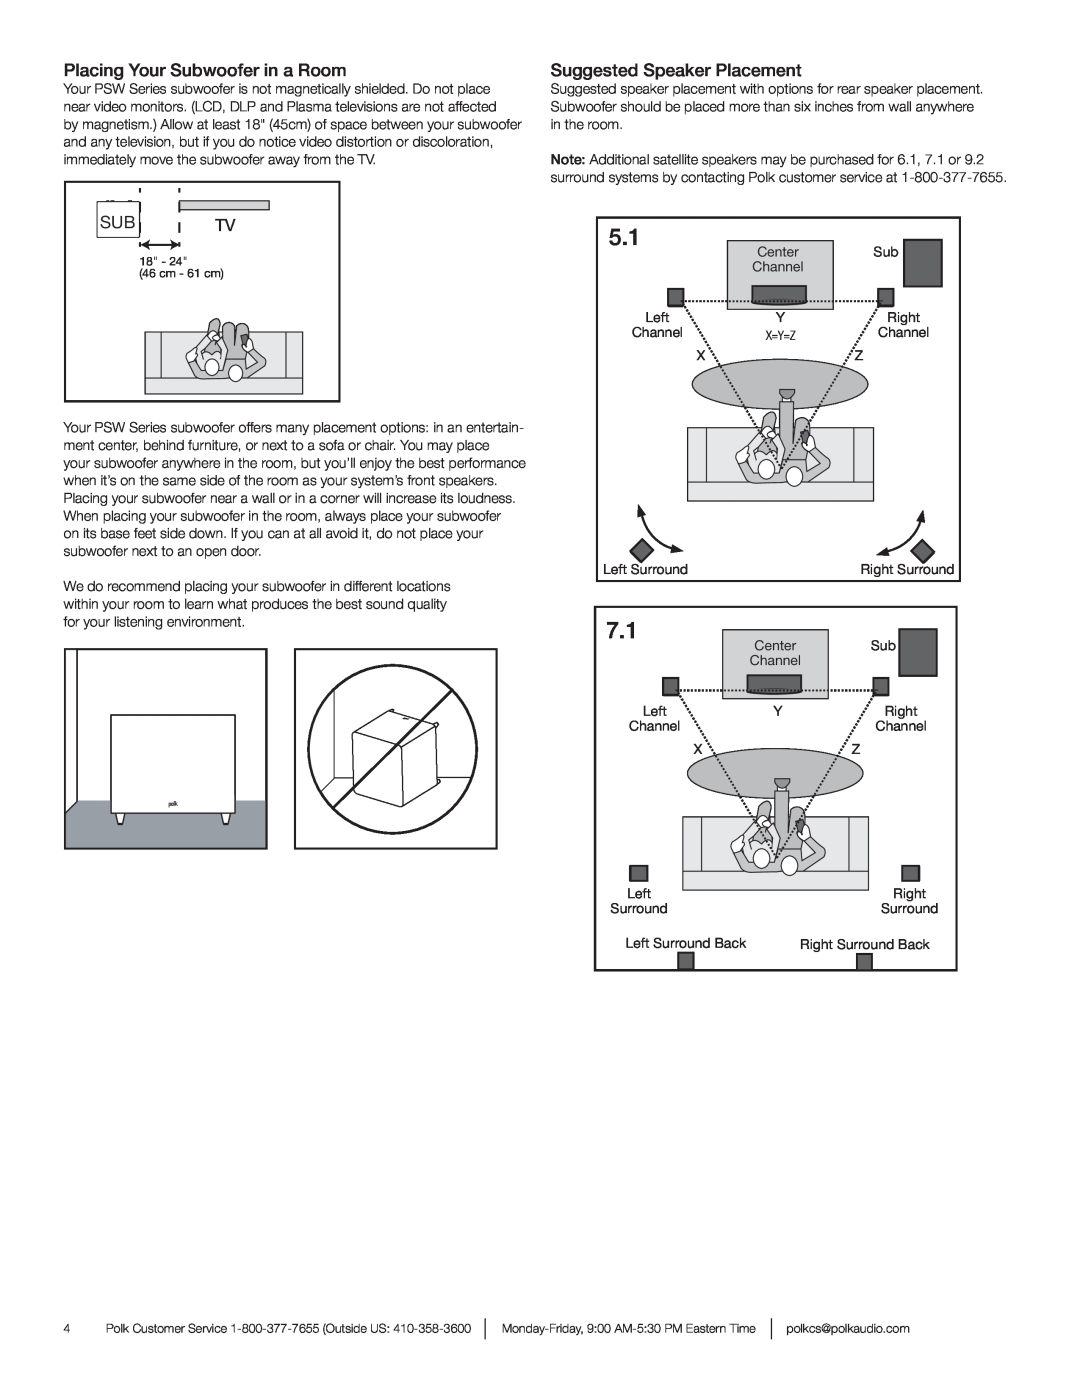 Polk Audio PSW121 owner manual Placing Your Subwoofer in a Room, Suggested Speaker Placement, Sub Tv 